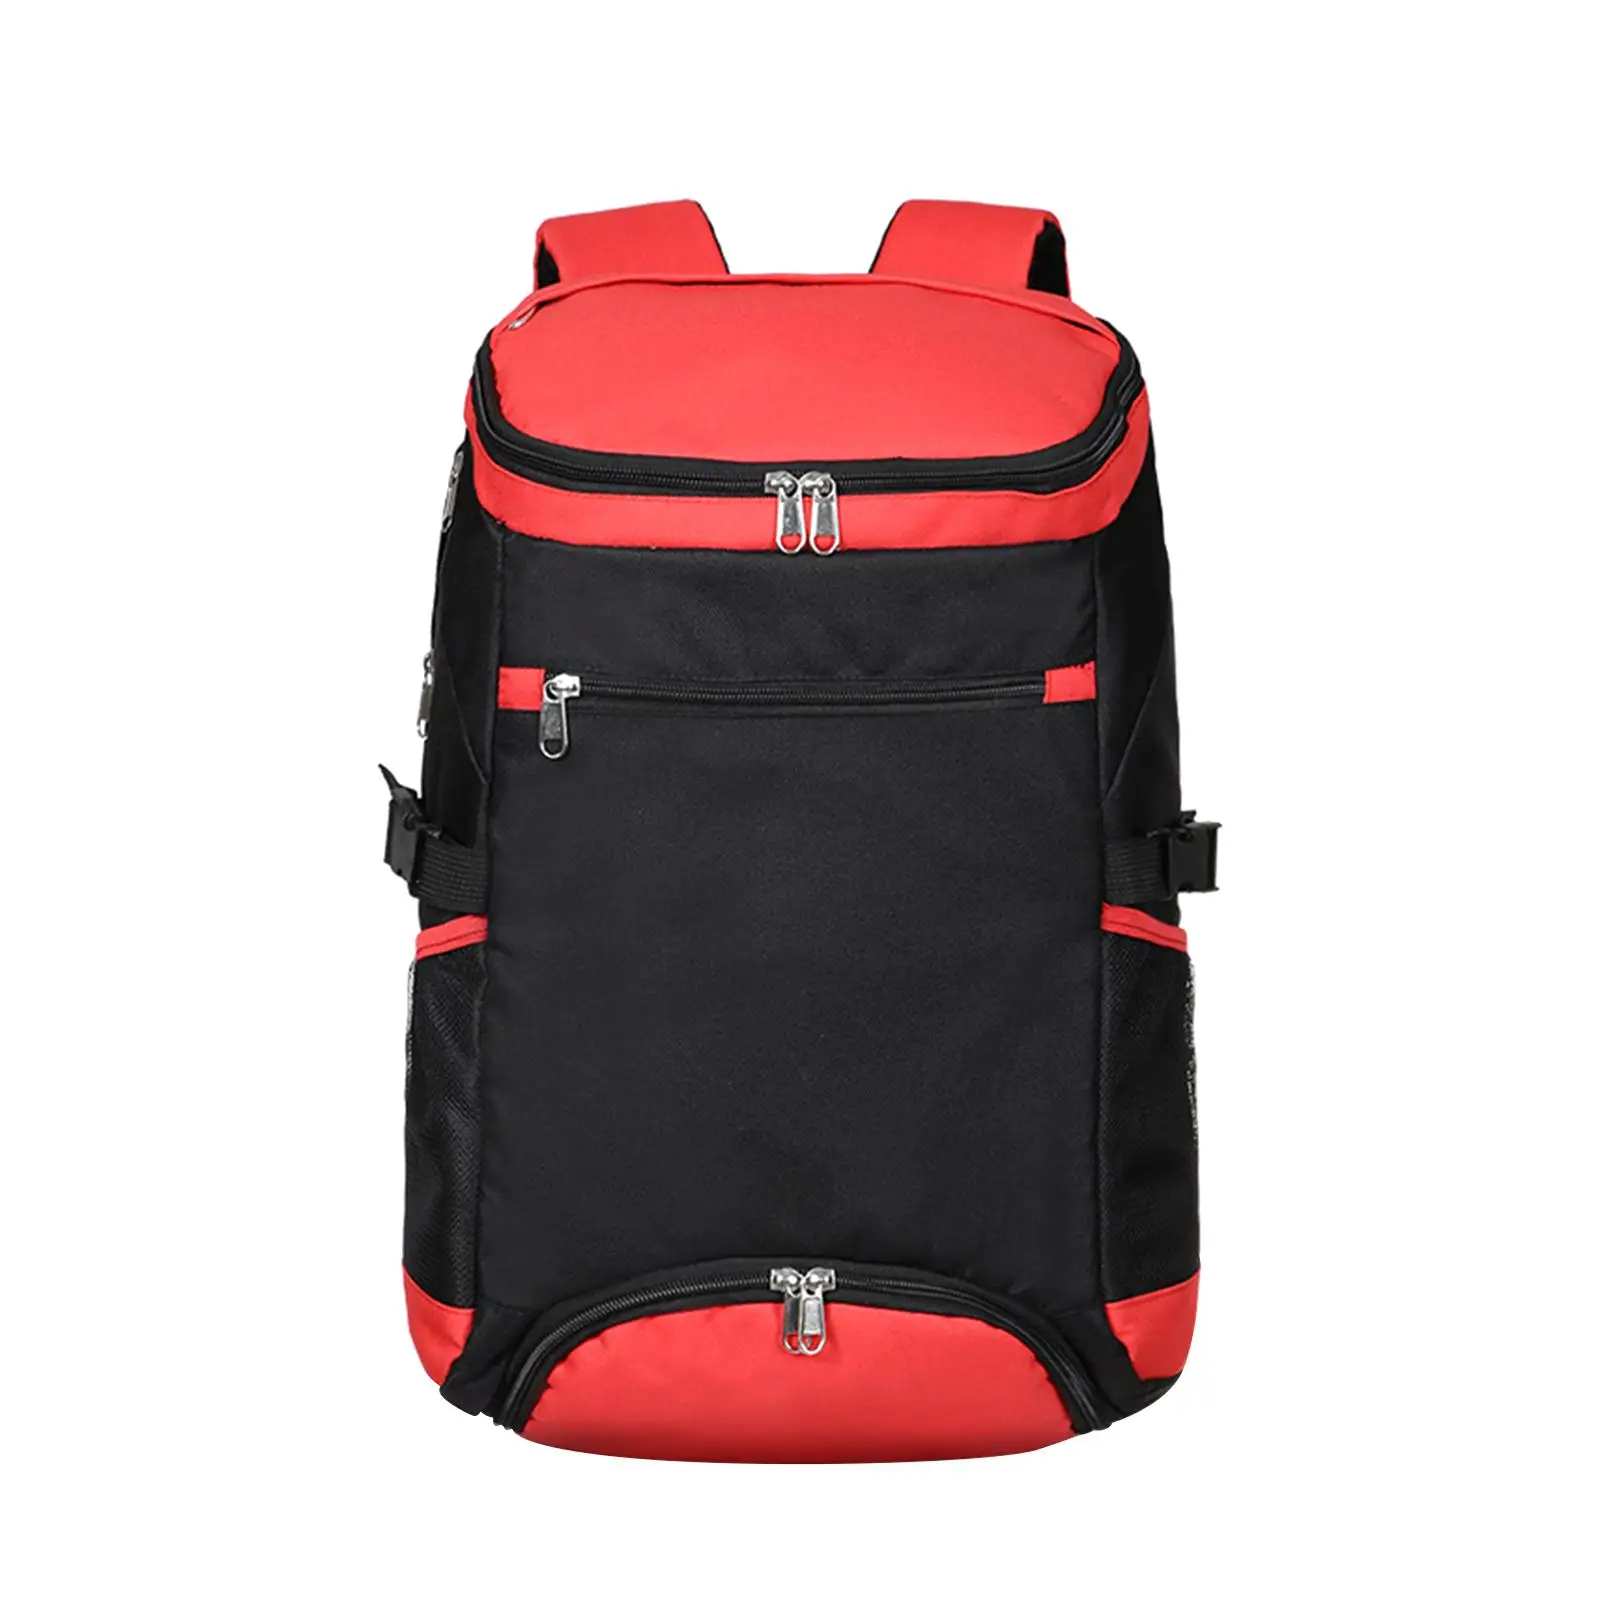 Tennis Backpack Large Capacity Backpack Racket Bag for Badminton Squash Racquets 2 Rackets Outdoor Sports Pickleball Racket